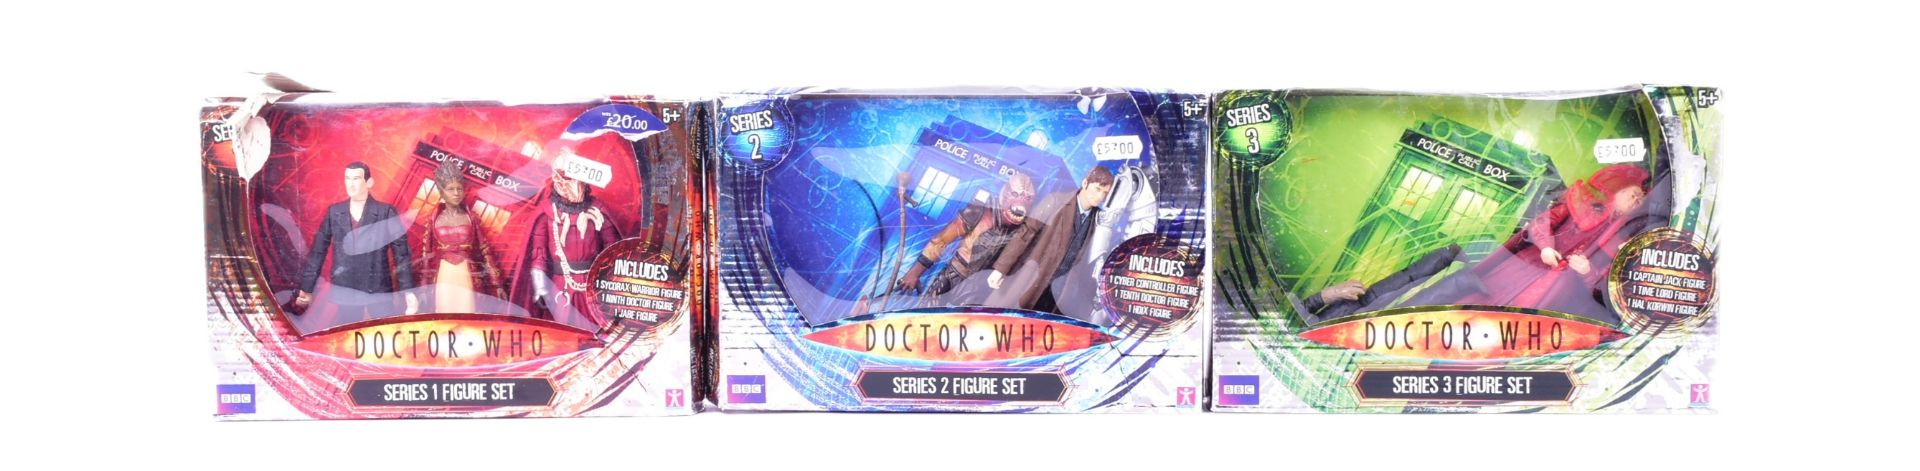 DOCTOR WHO - CHARACTER OPTIONS - 'SERIES' FIGURE SETS